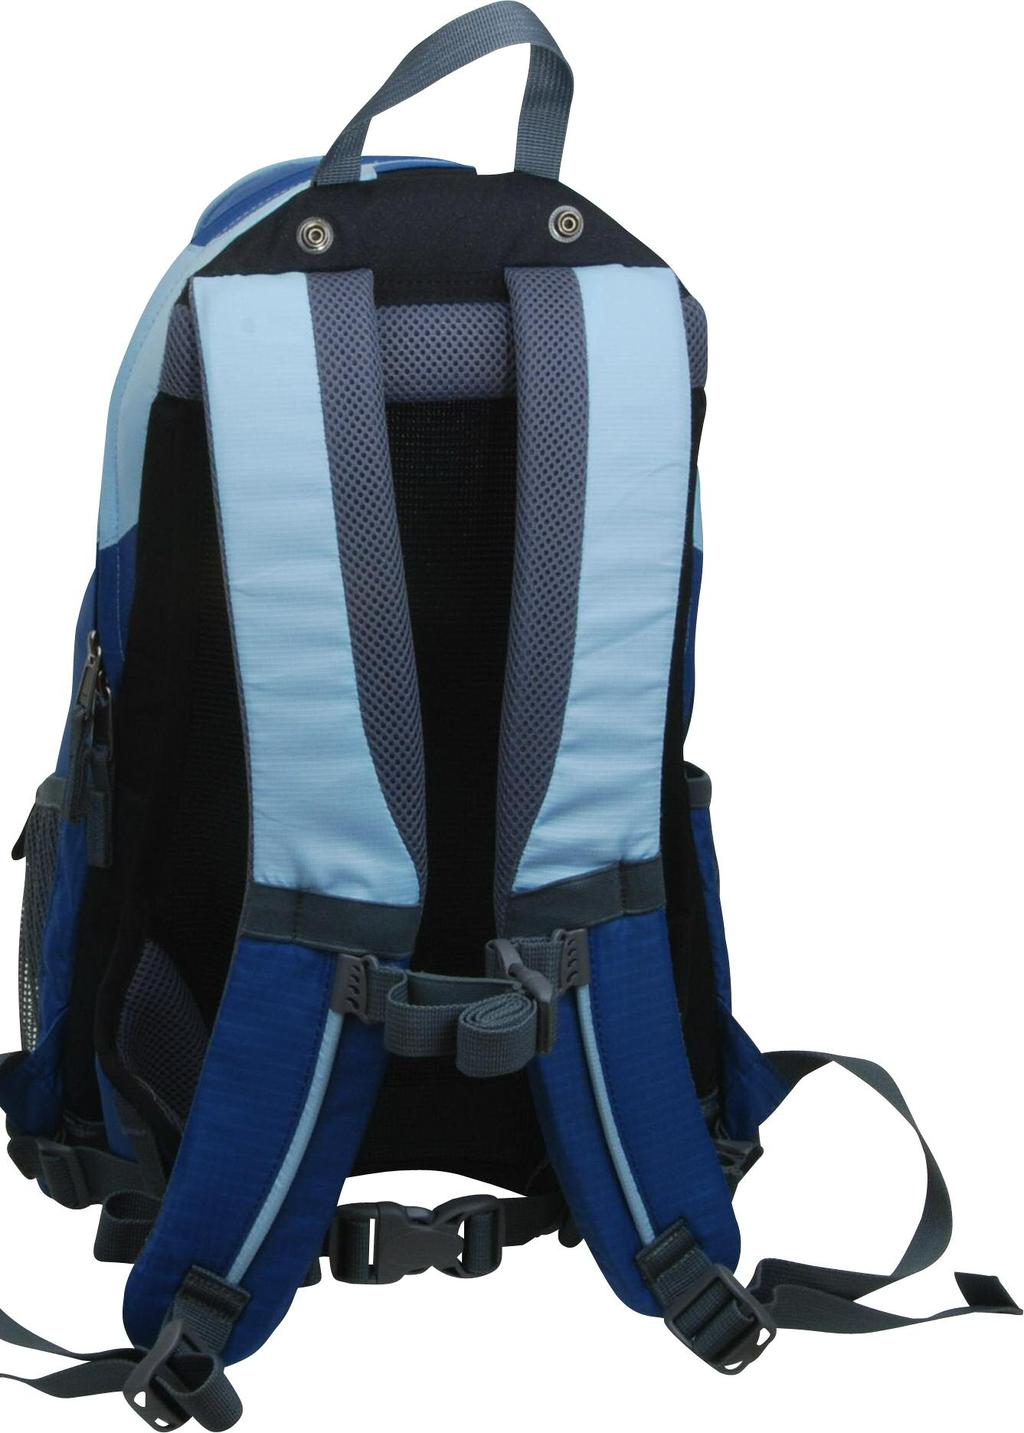 4 DAY PACKS Rapid New aesthetic daypack design Lightweight ATVi-Harness Zipped main compartment.